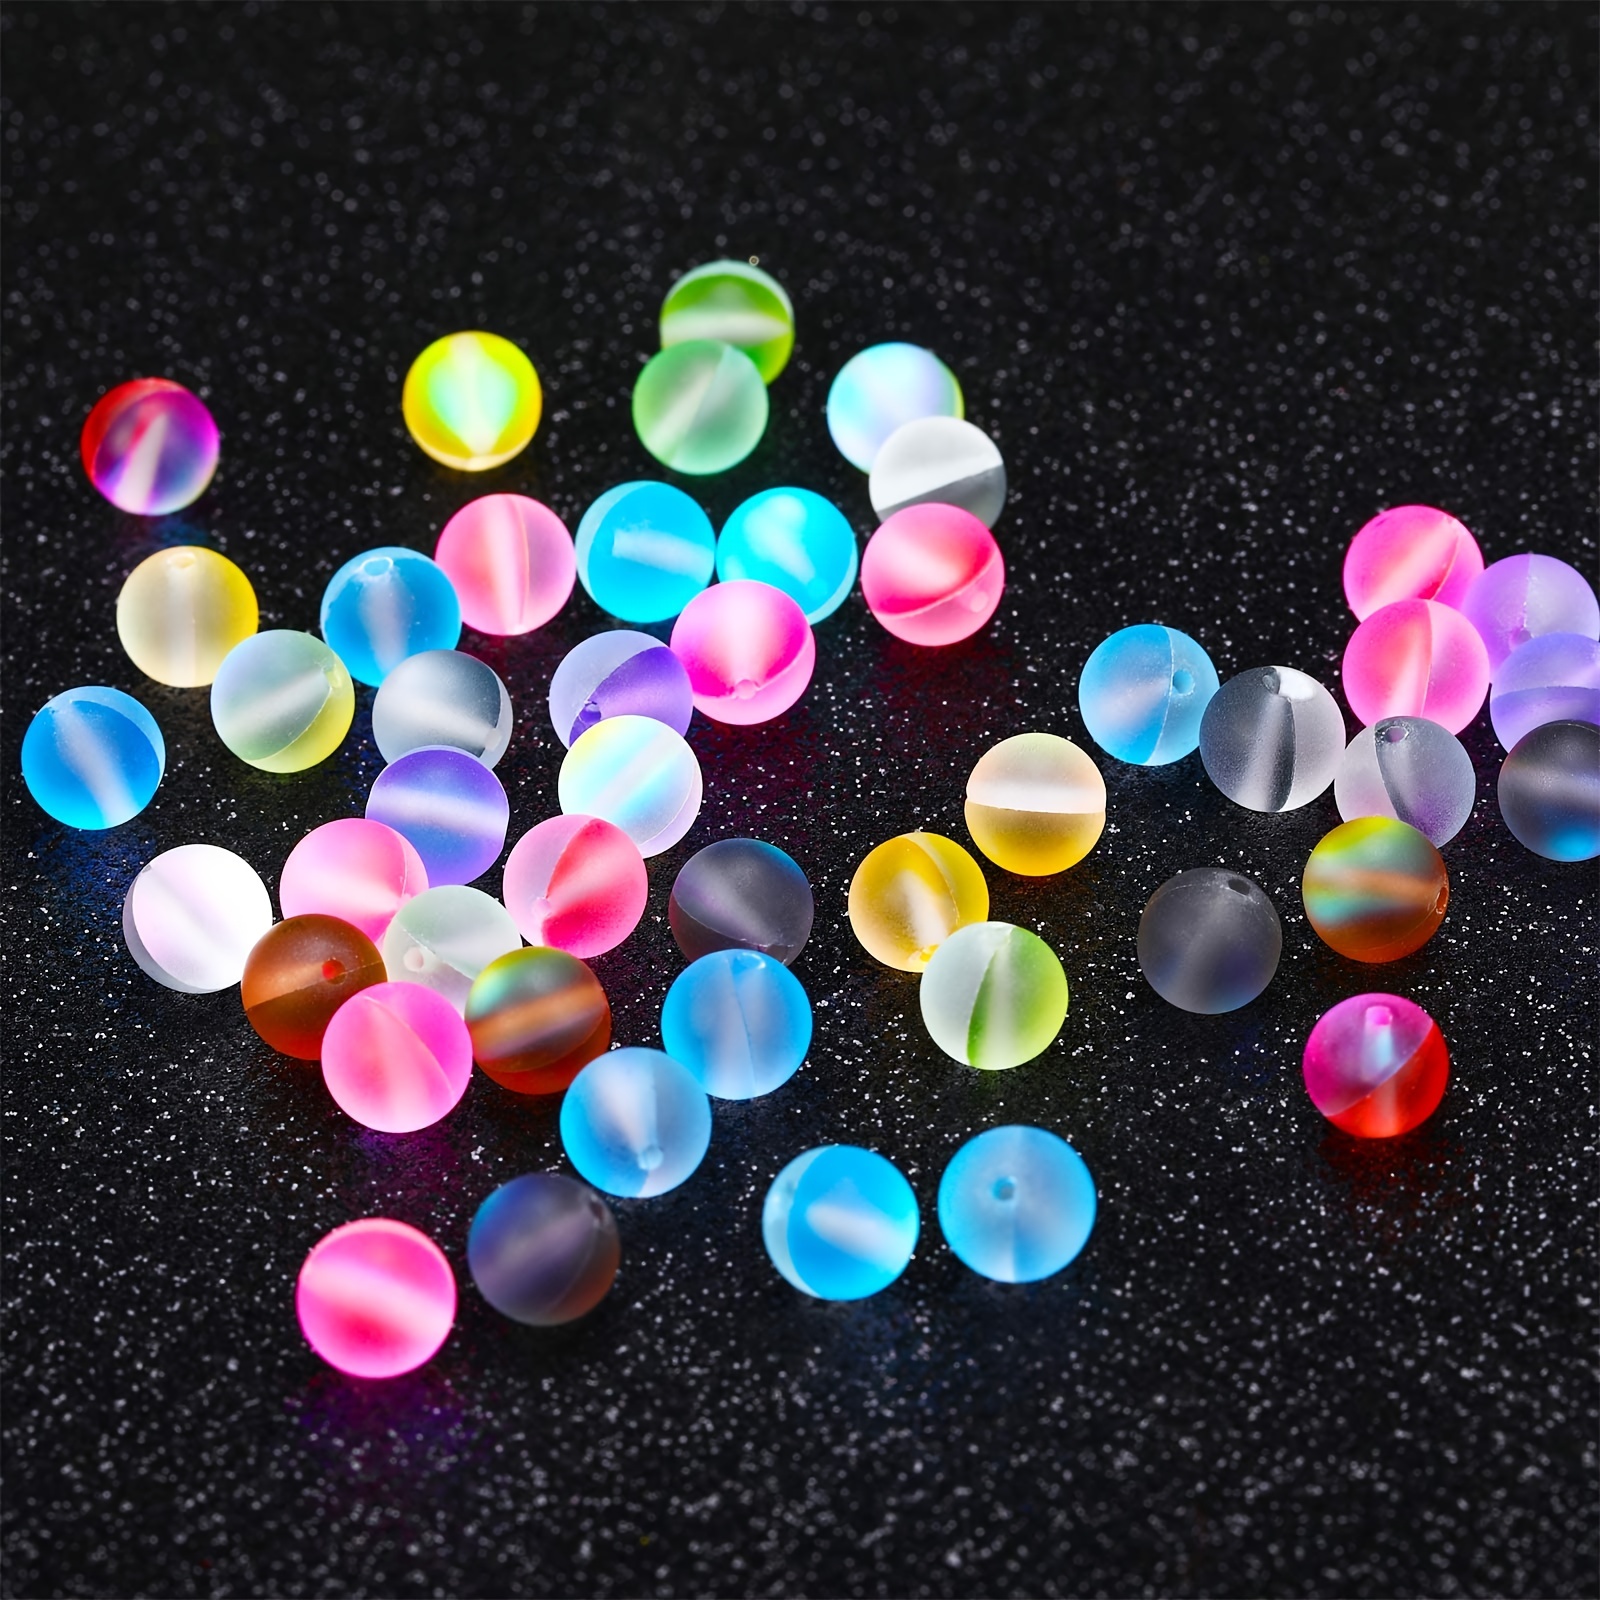 ccHuDE 200 Pcs Matte Crystal Glass Beads Mermaid Aurora Beads with Hole  Jewelry Making Crafts DIY 4mm